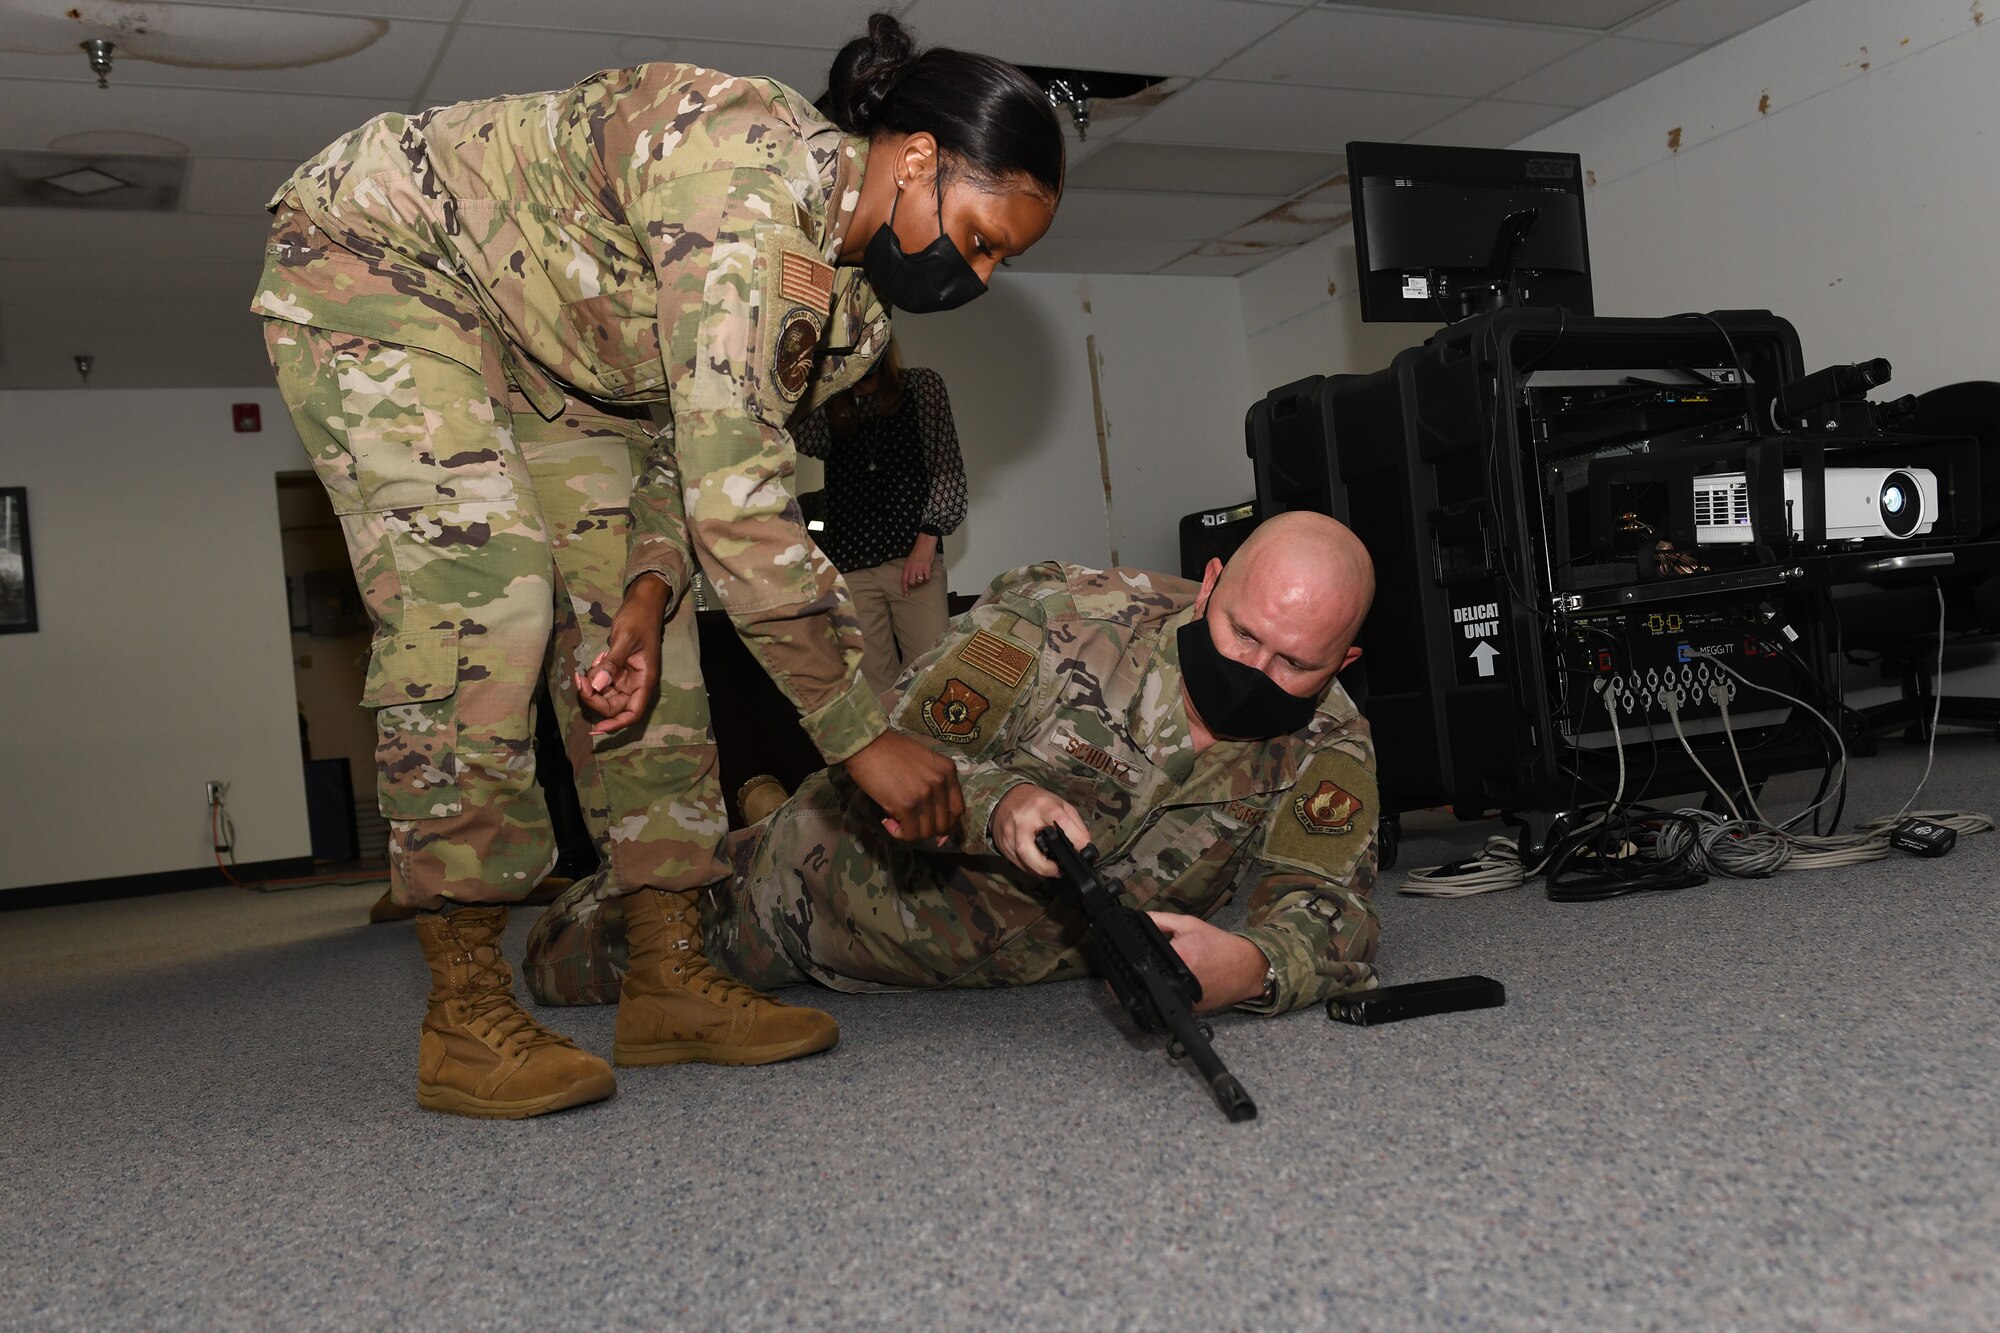 Photo shows a man on the ground learning how to work a weapons simulator.